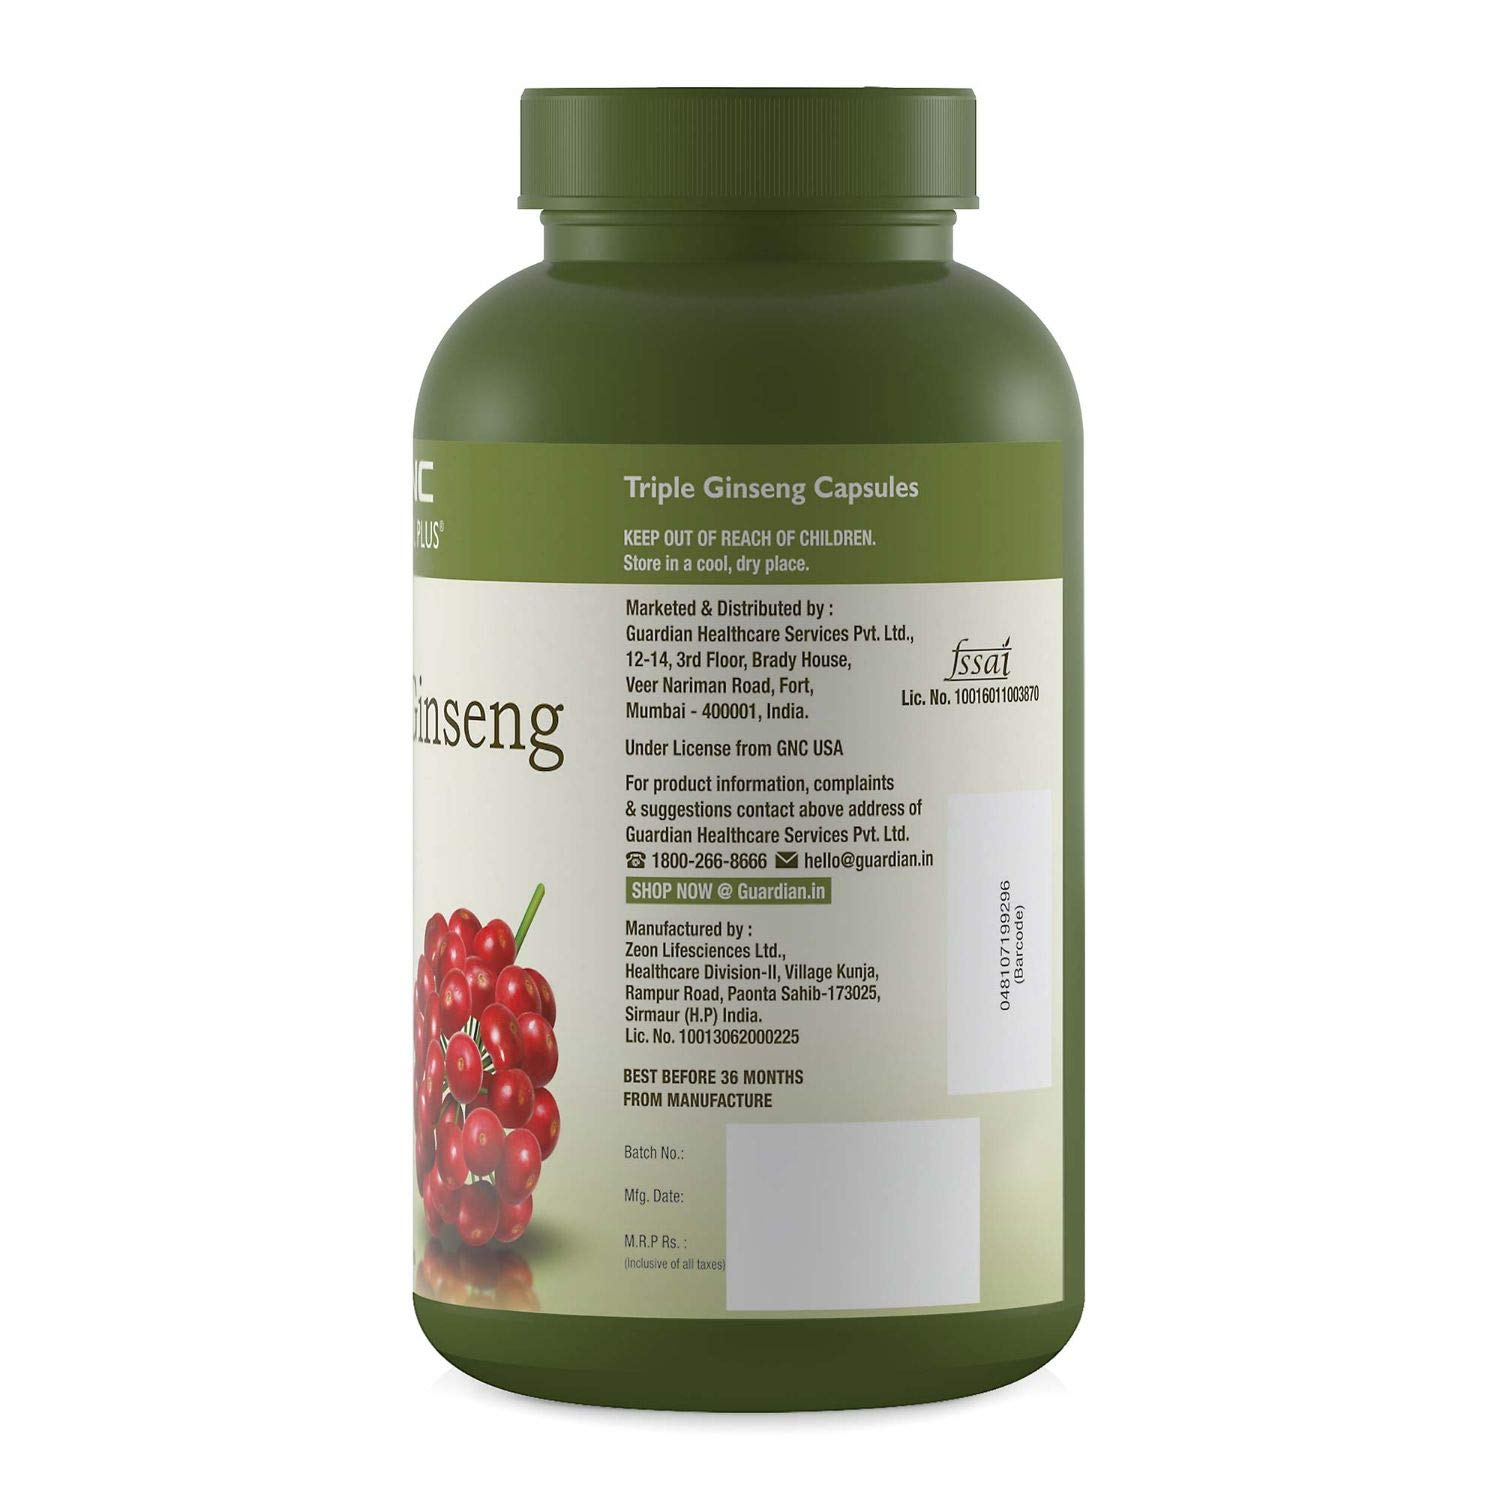 Image Of Gnc Triple Ginseng Root, 90 Capsules Beast Nutrition